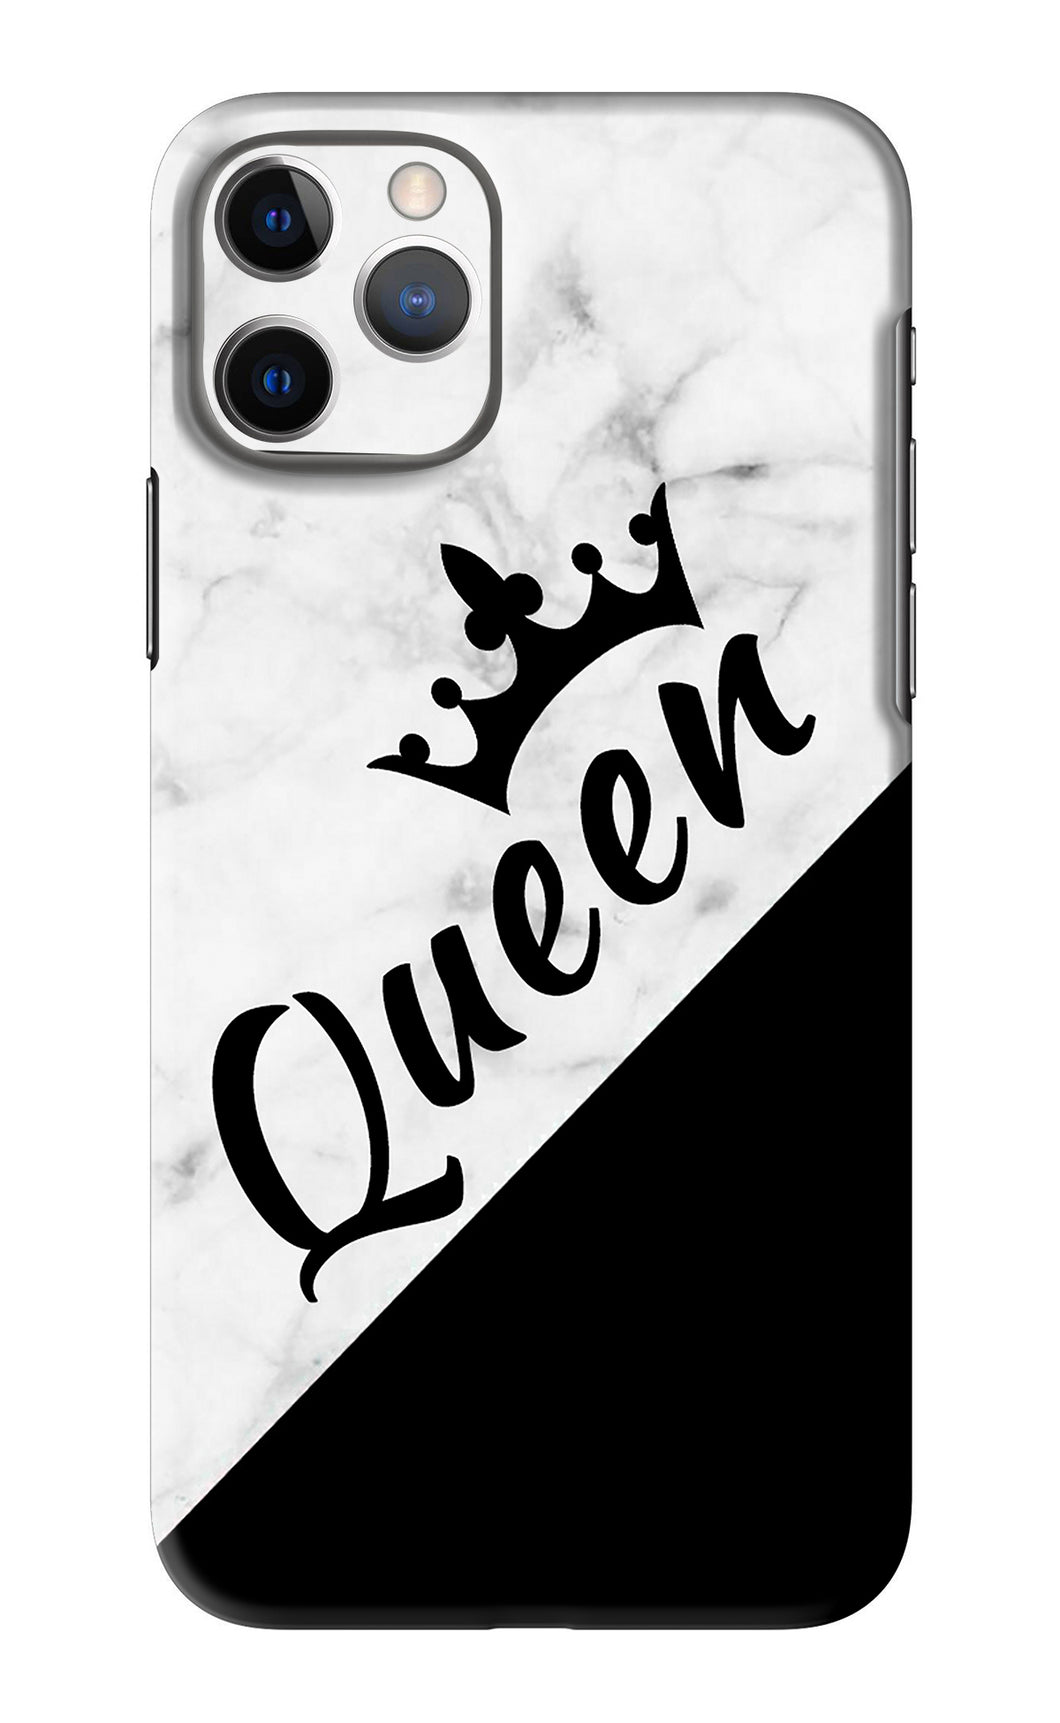 Queen iPhone 11 Pro Max Back Skin Wrap